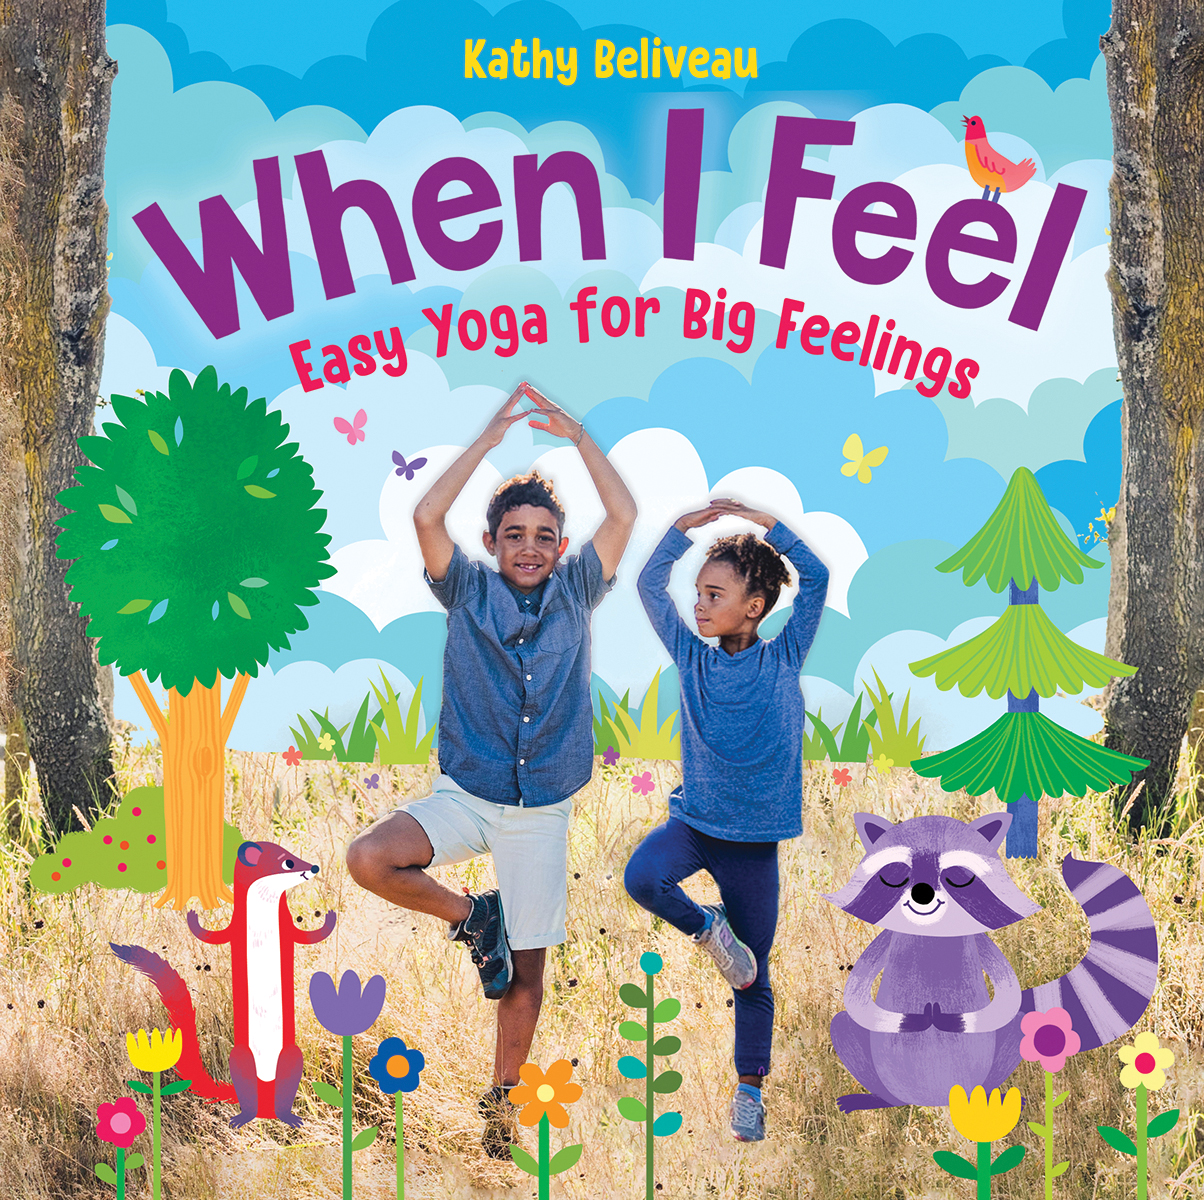 Q&A with When I Feel author Kathy Beliveau